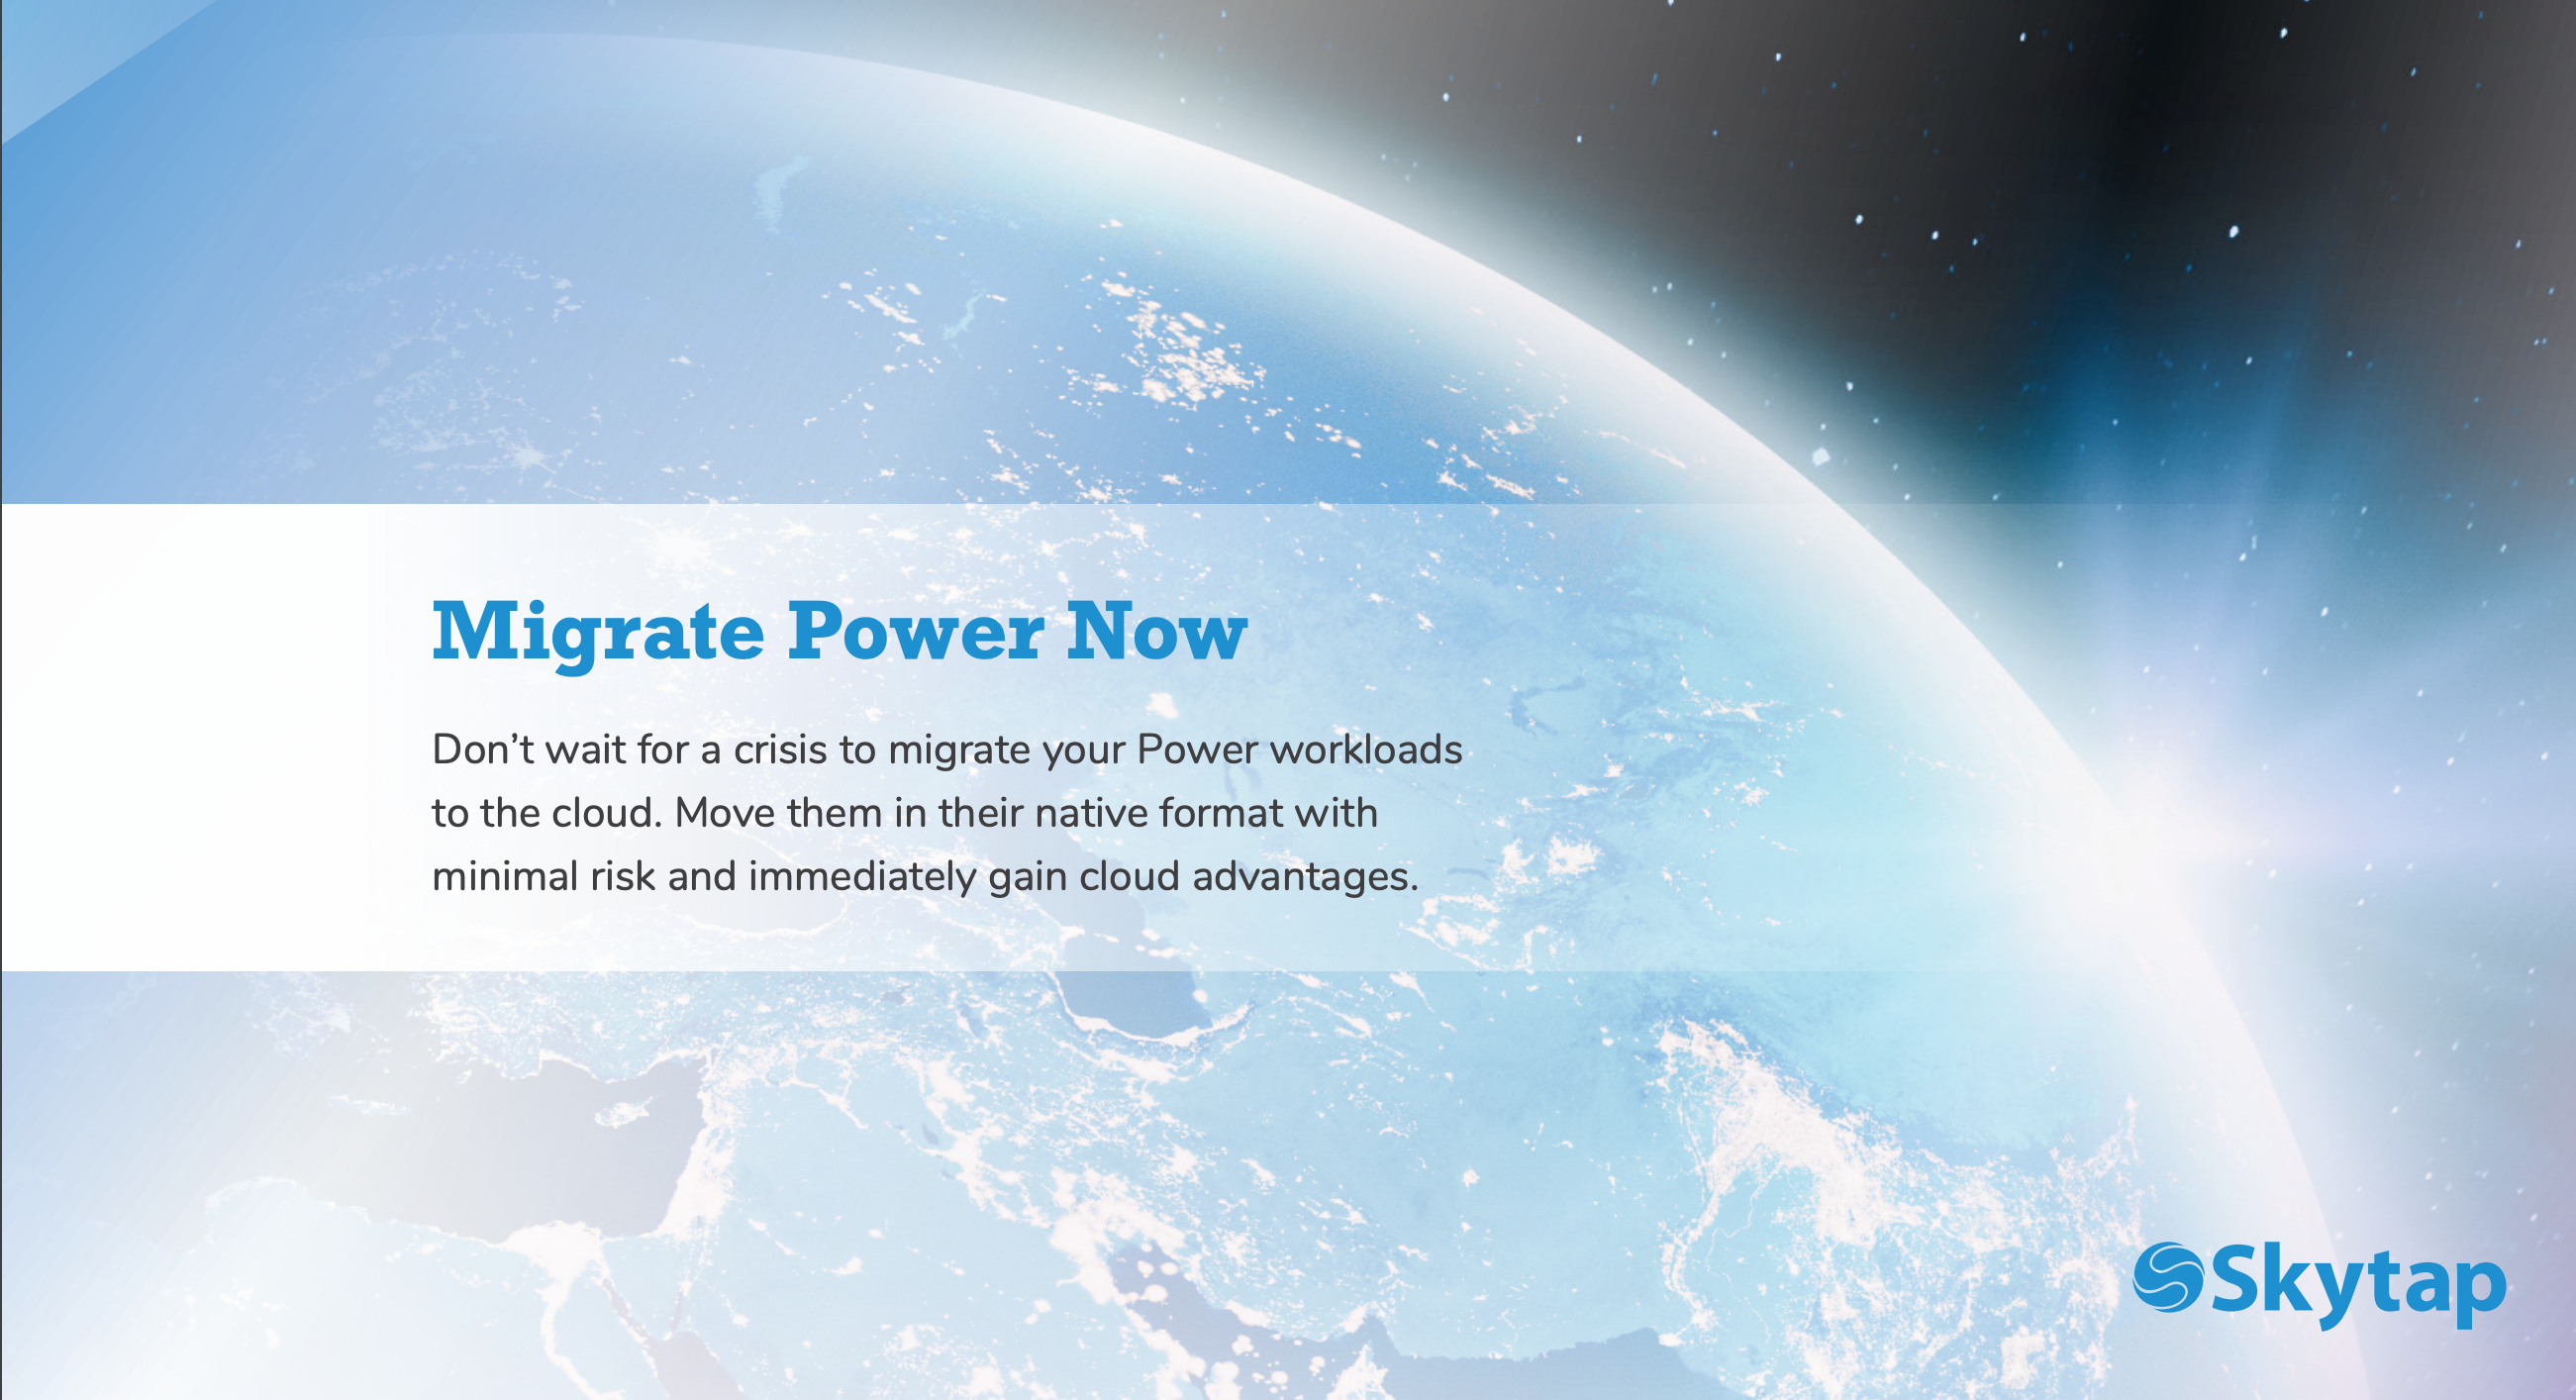 Migrate Power Now